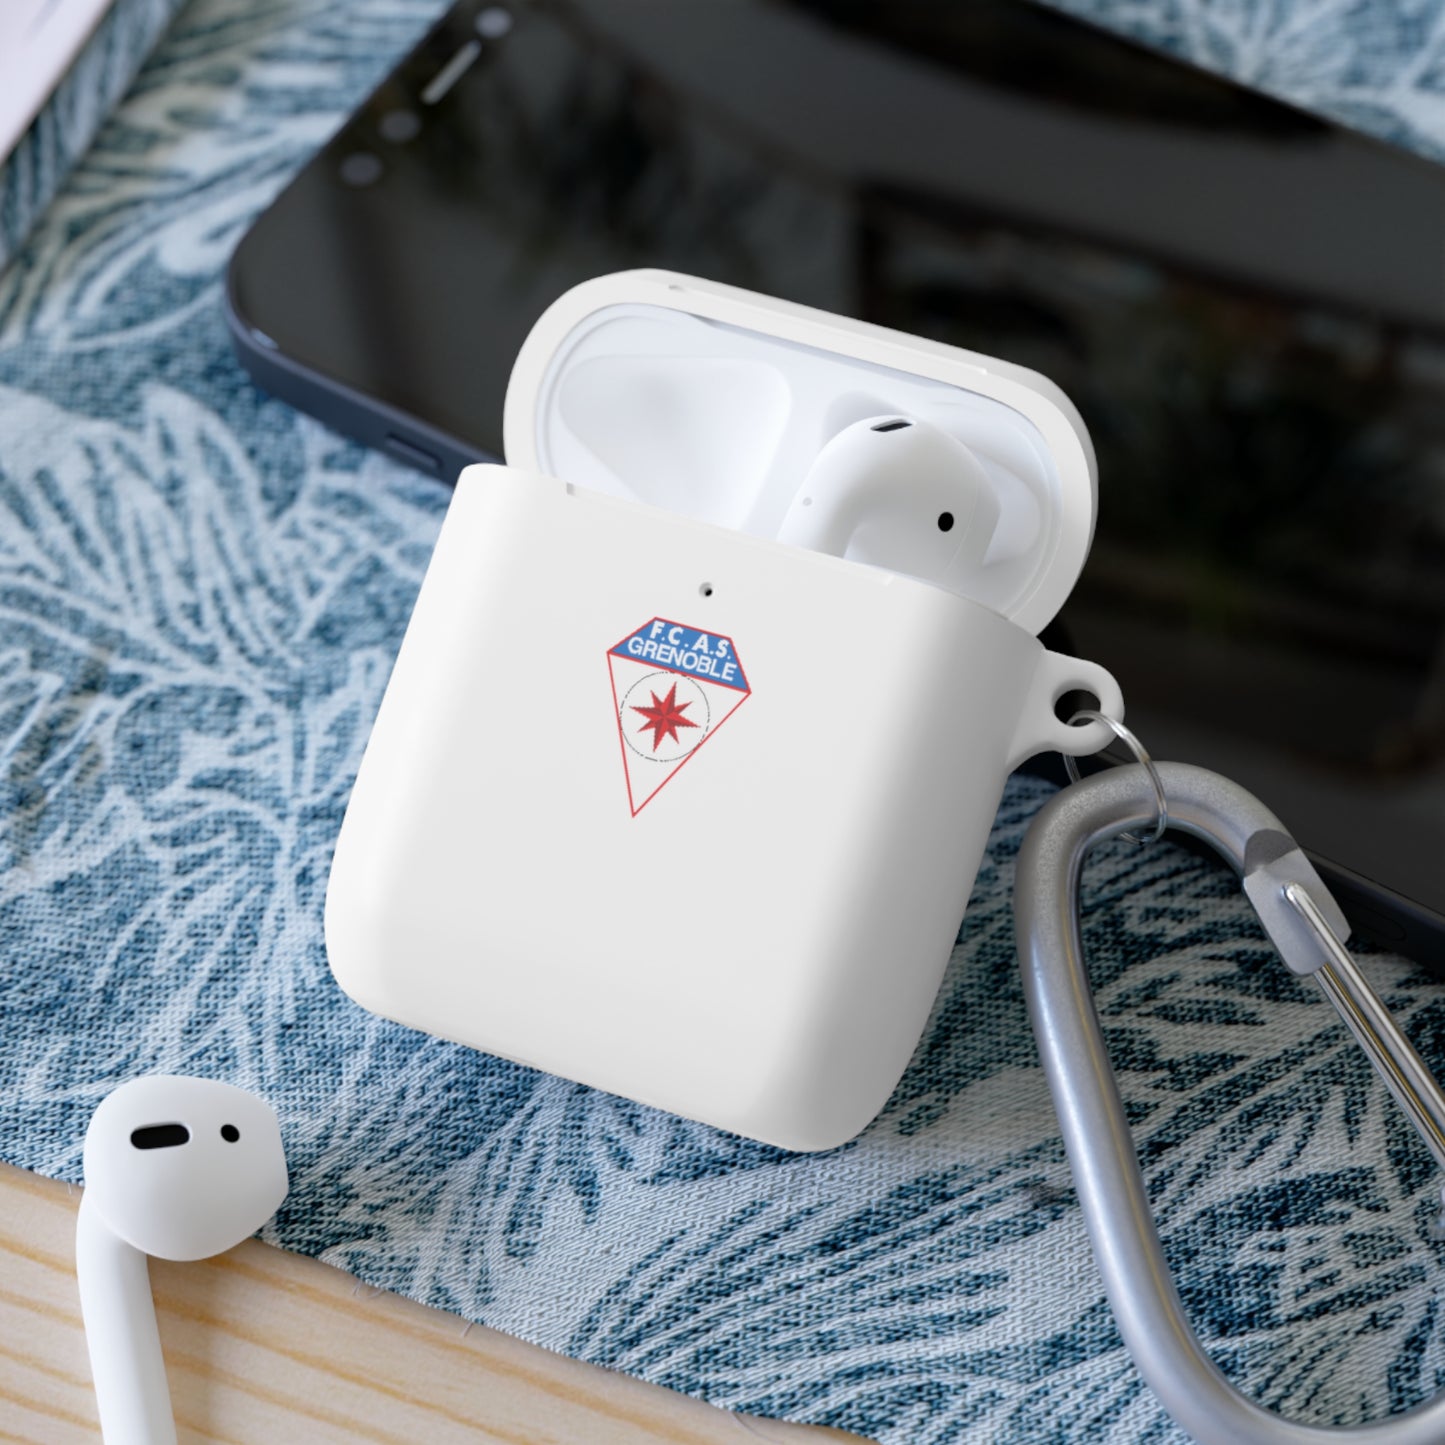 FC AS Grenoble AirPods and AirPods Pro Case Cover